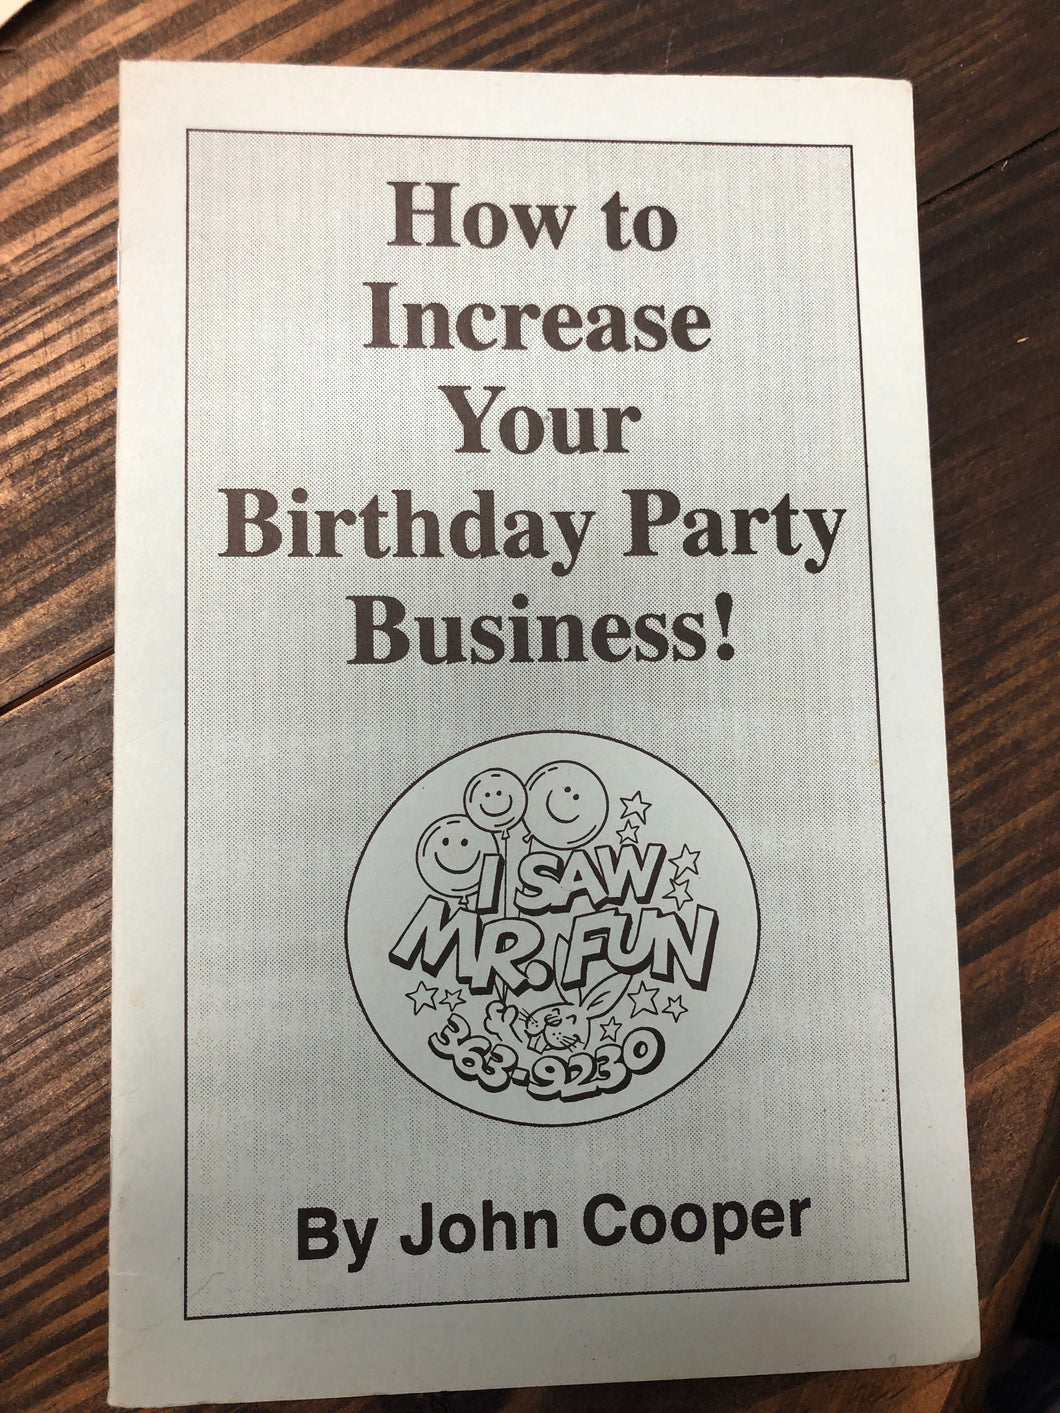 How to increase your birthday party business By John Cooper